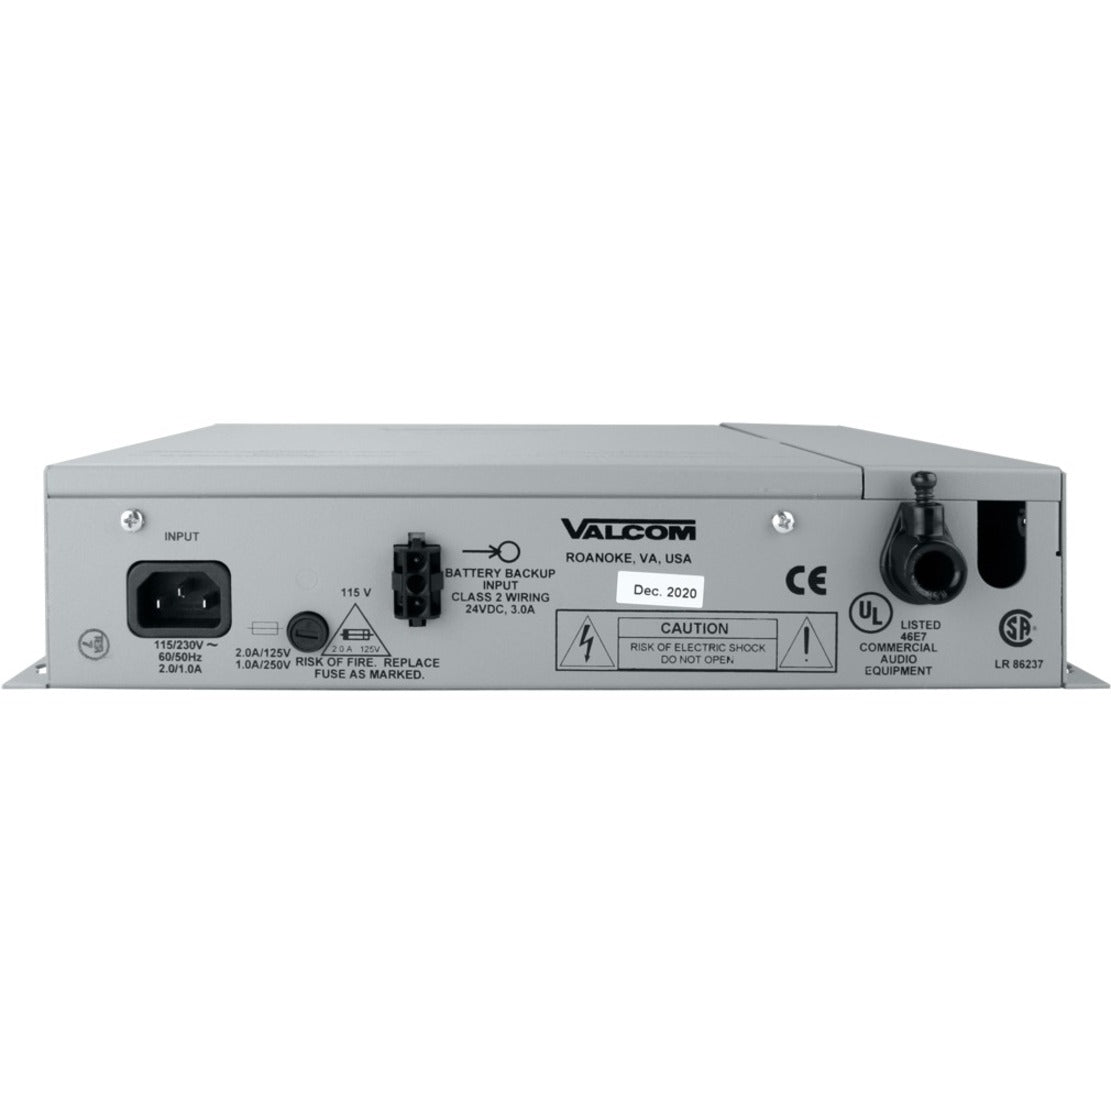 Valcom V-2006A 6 Zone One-Way Page Control with Power, Emergency Call System, United States